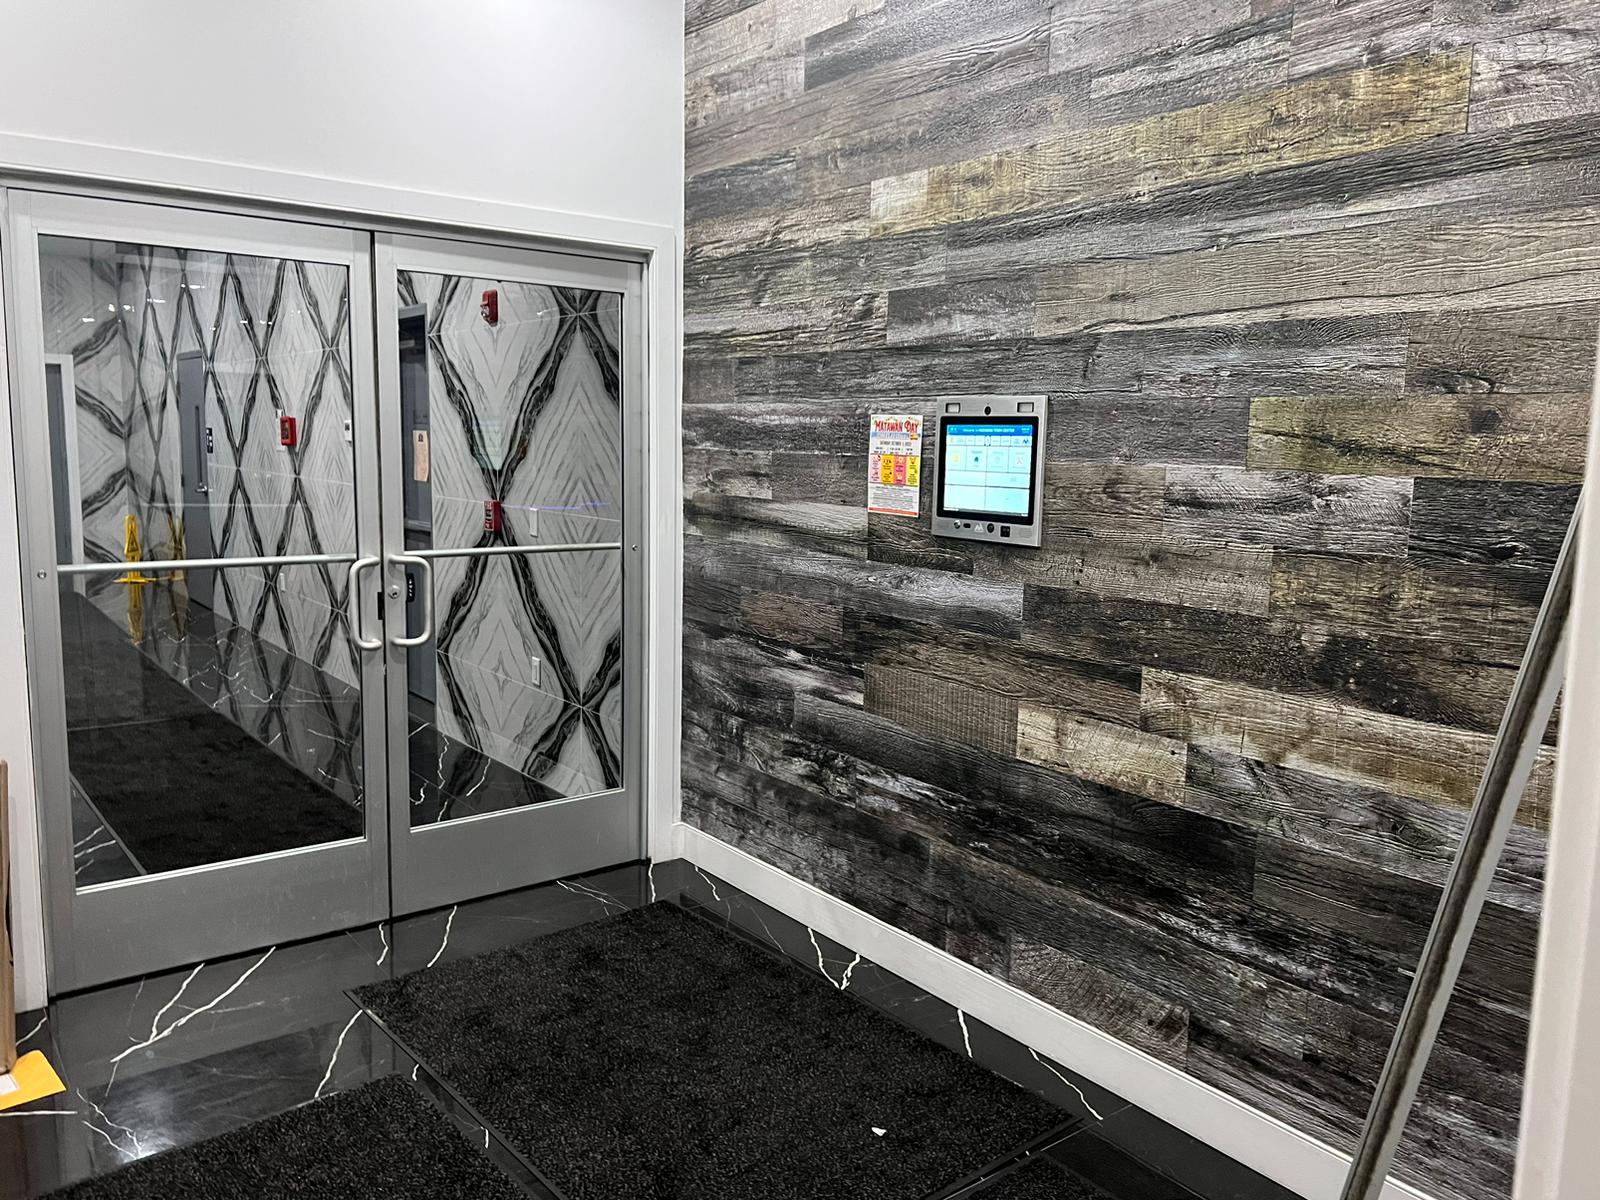 mvi access system installed on wood wall by apartment entrance